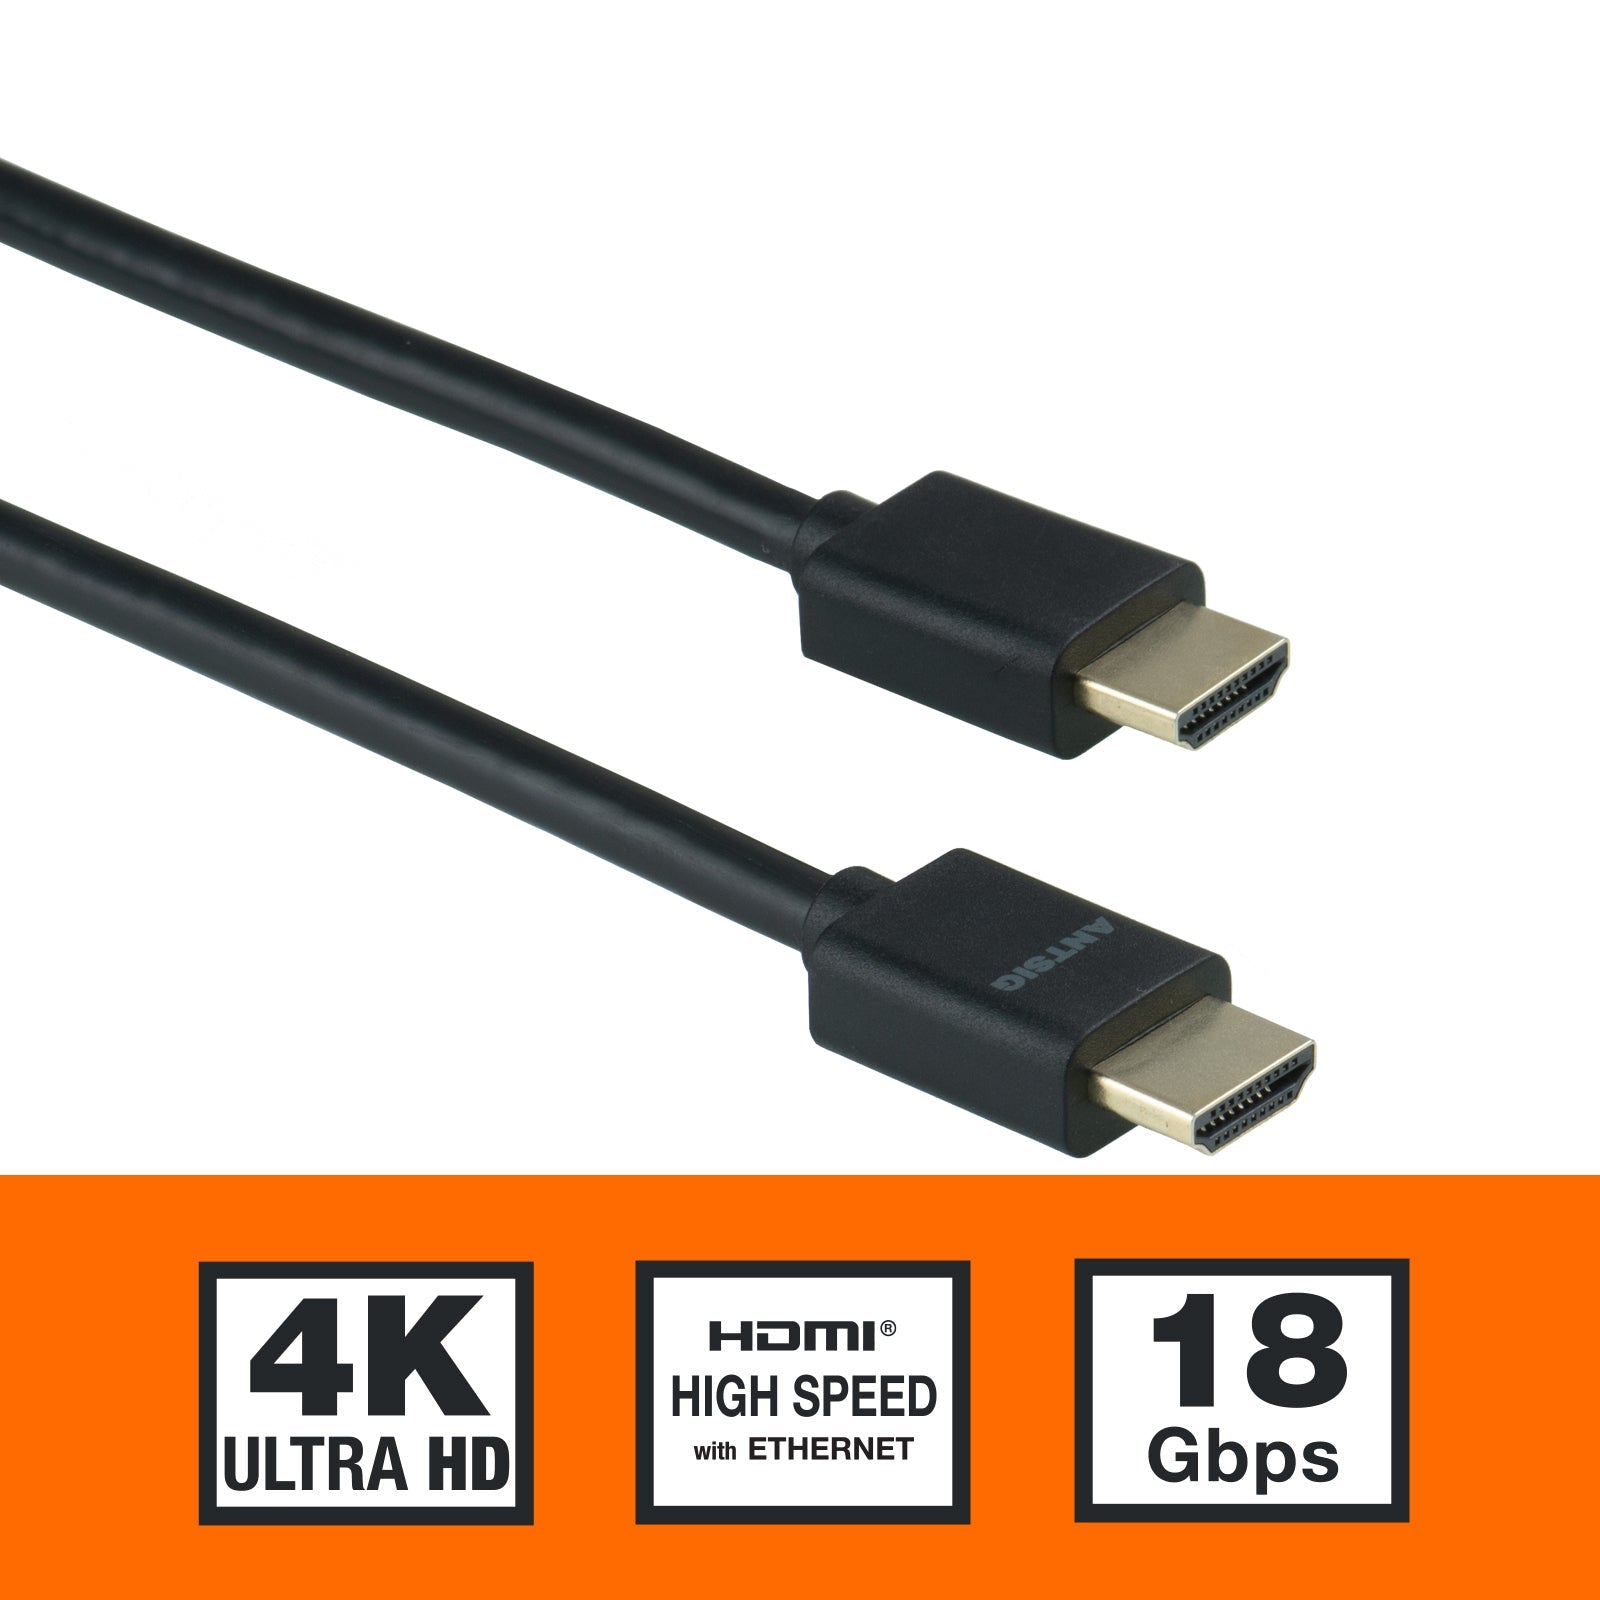 3m 1080p 4K HDMI Cable